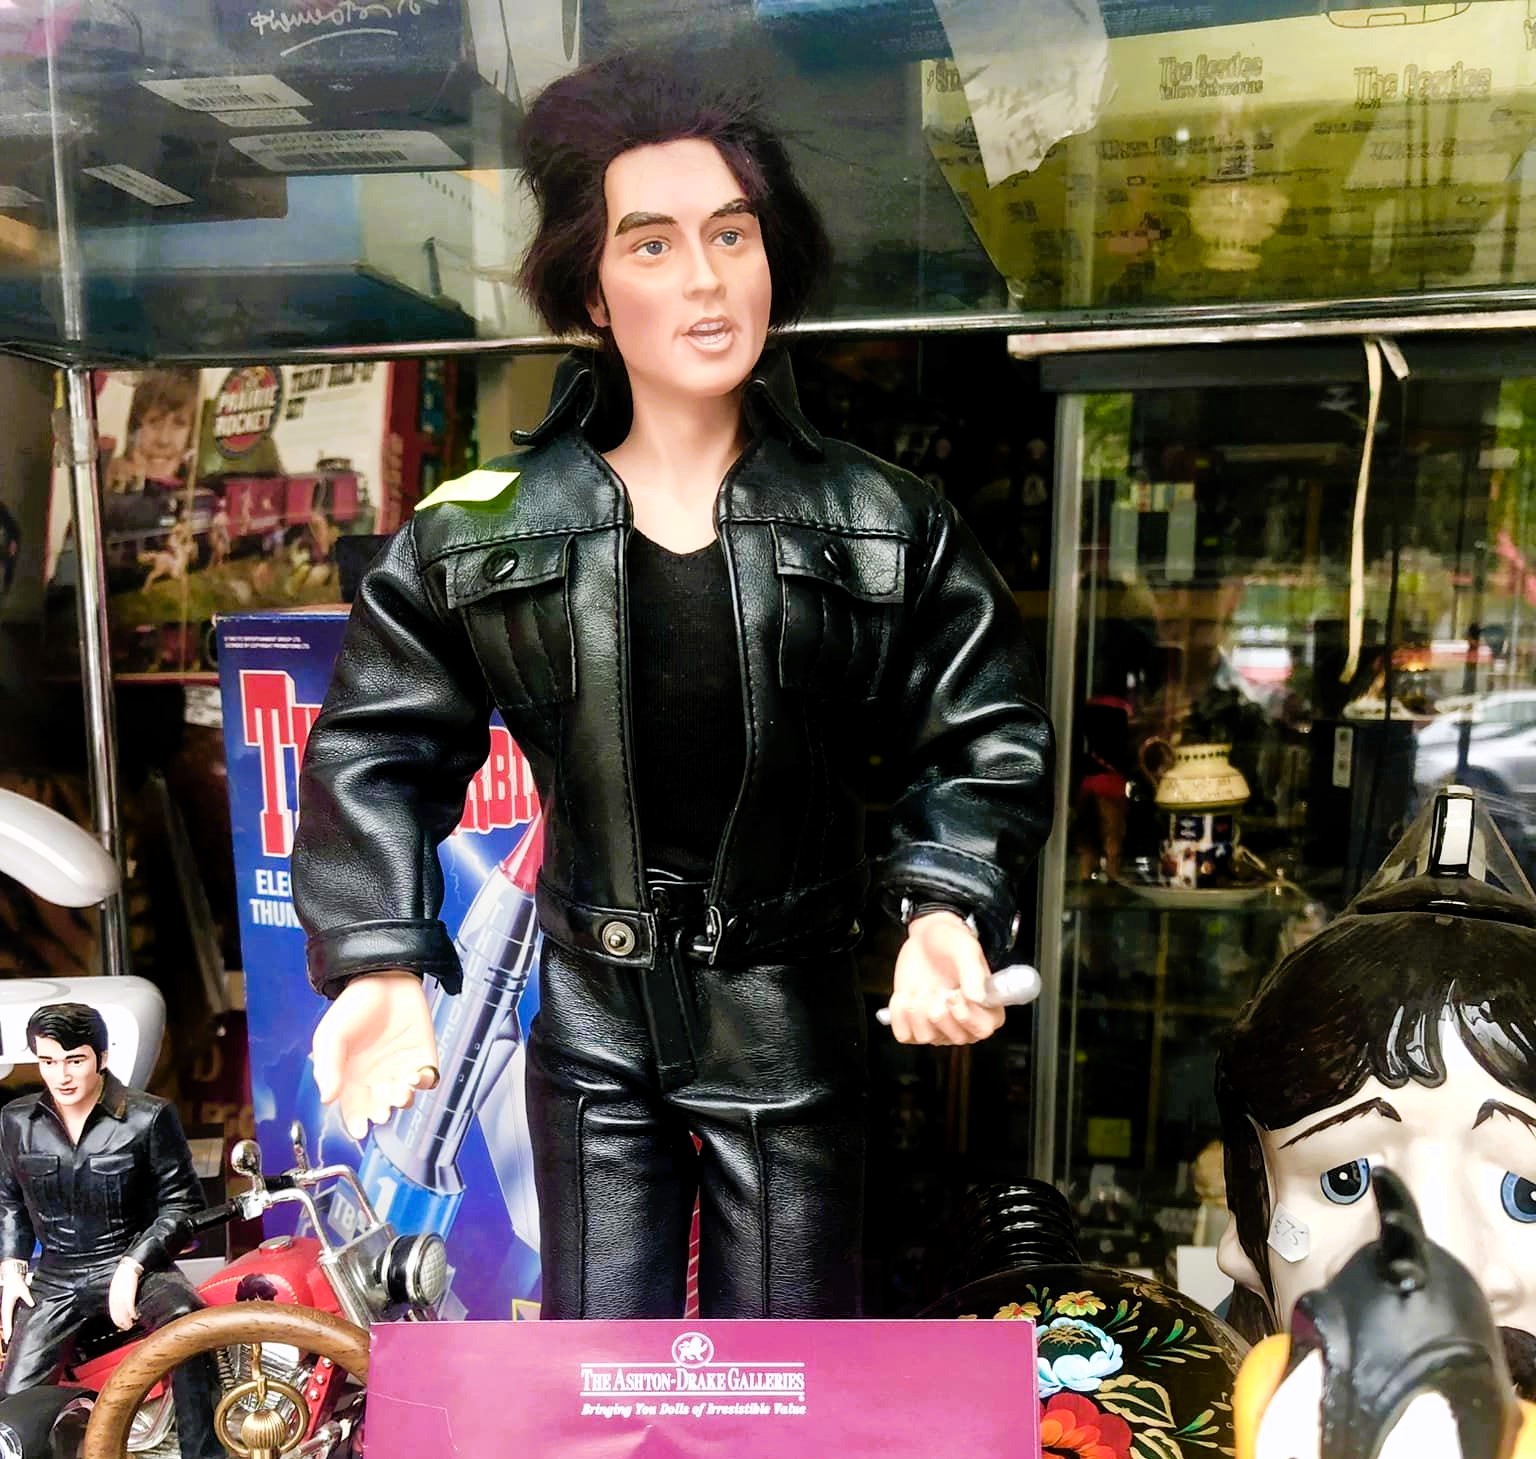 A charity shop's attempt to sell a life-size Elvis Presley doll falls flat as its lack of resemblance to the King of Rock 'n' Roll sparks ridicule and disbelief.